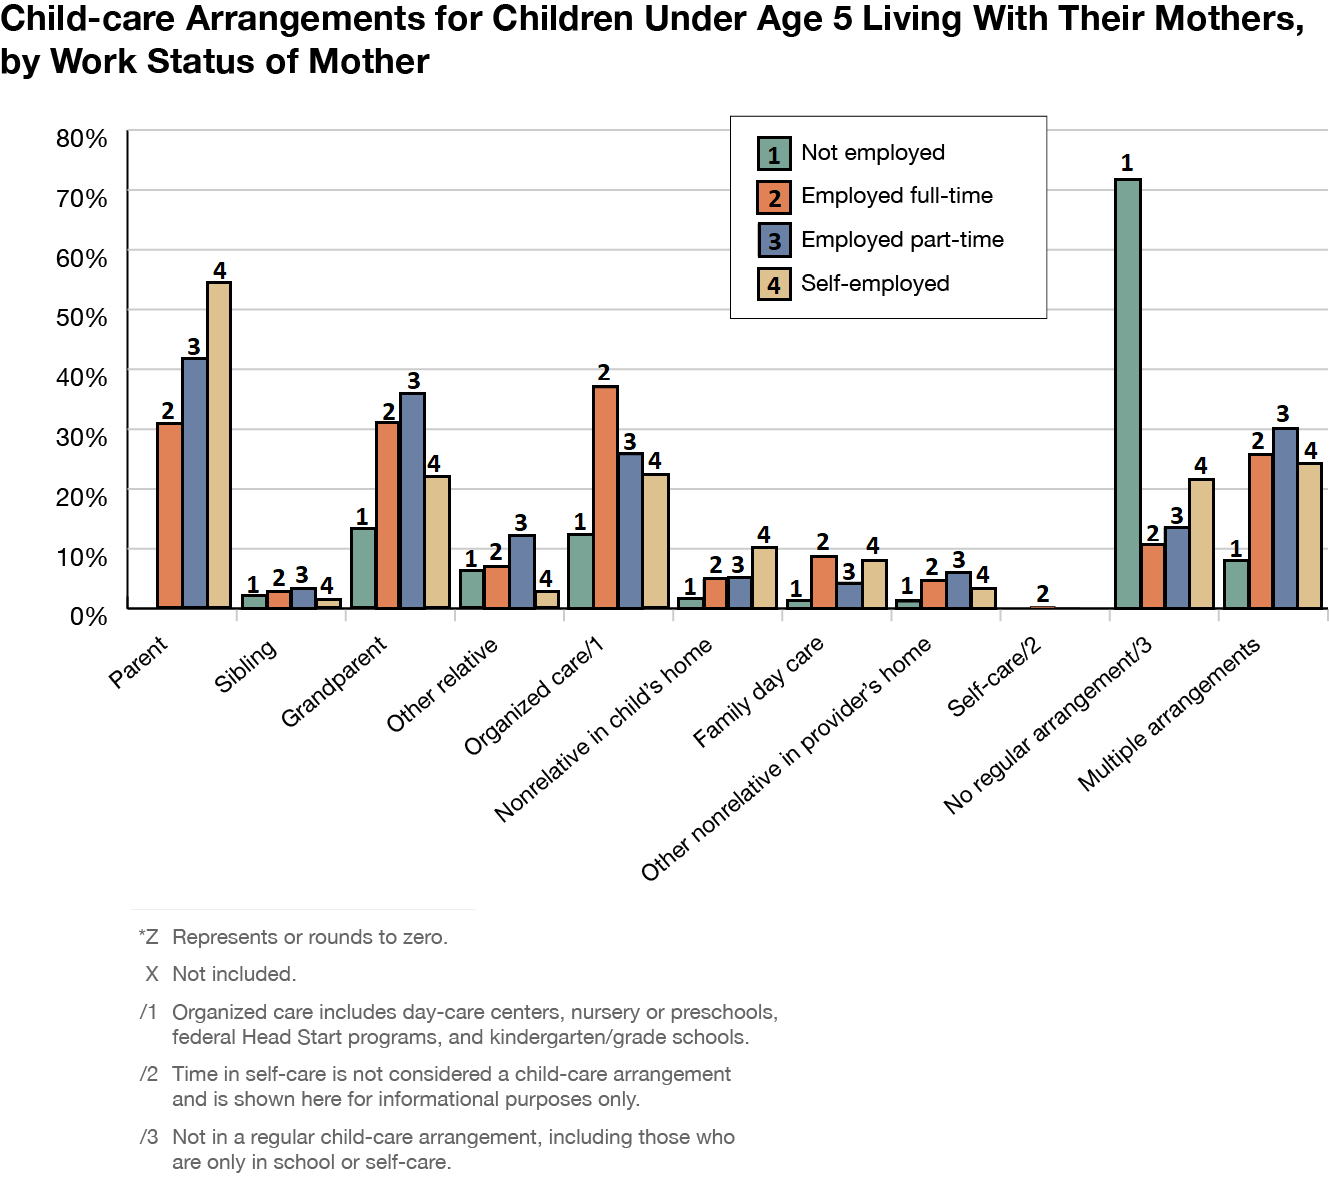 Child-care arrangements for children under age 5 living with their mothers, by work status of mother. To find the details on the graph please press Image description link below it.